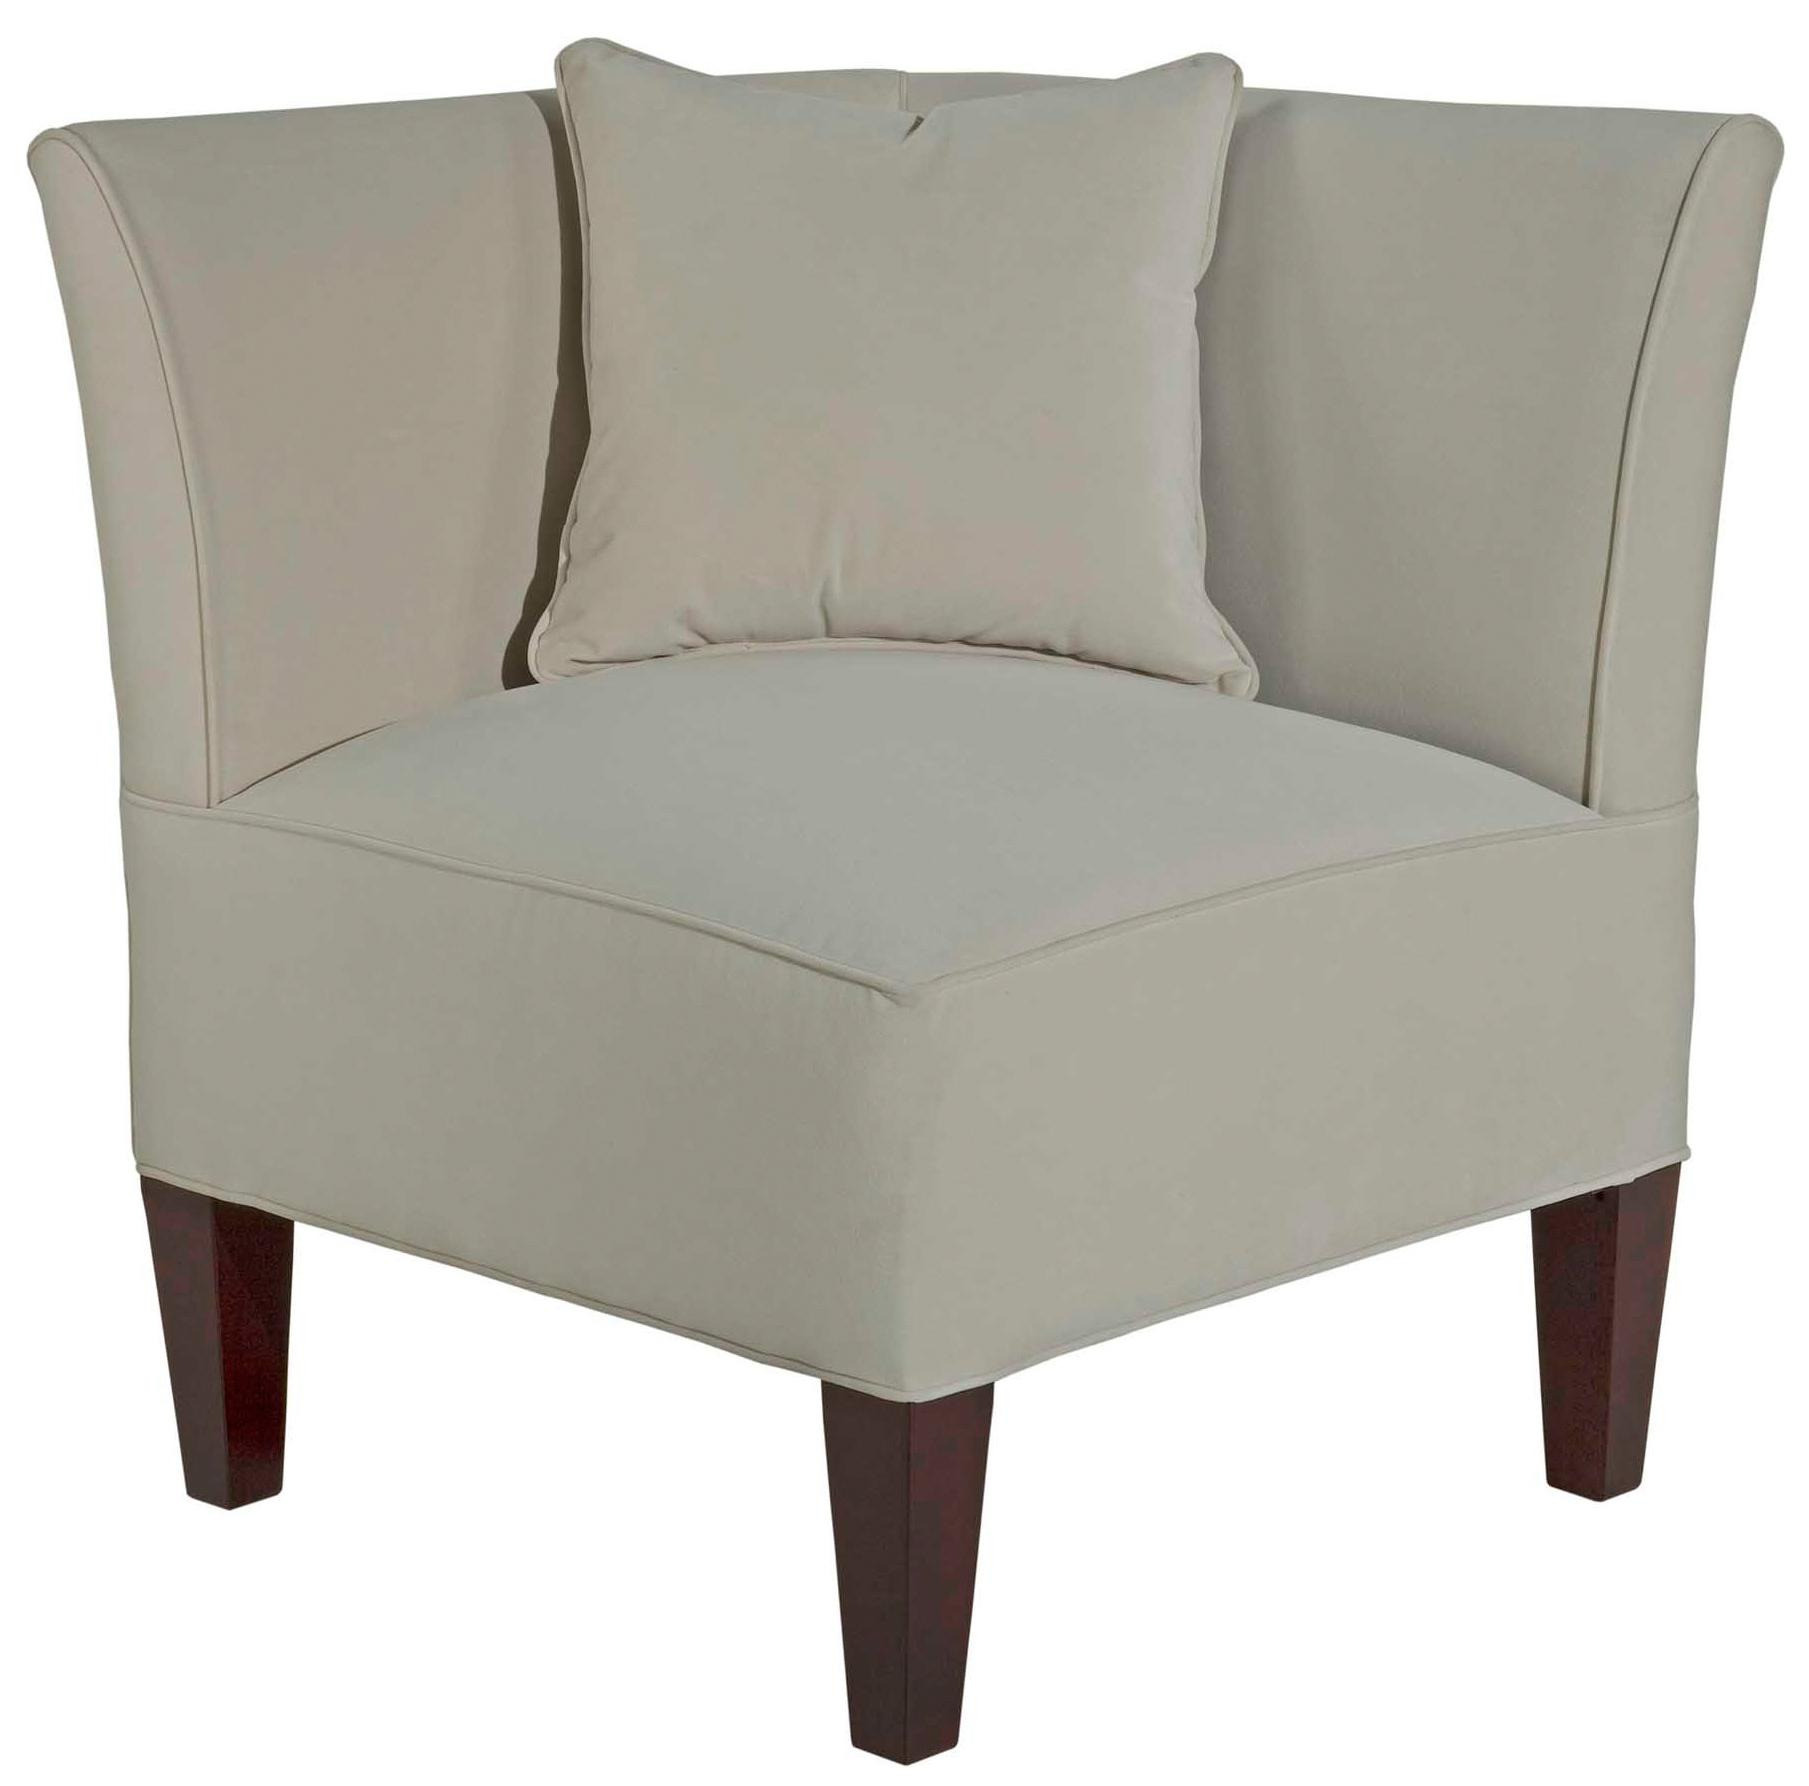 Small Corner Chair For Bedroom
 Broyhill Bedroom Sets Small Accent Chairs For Awesome